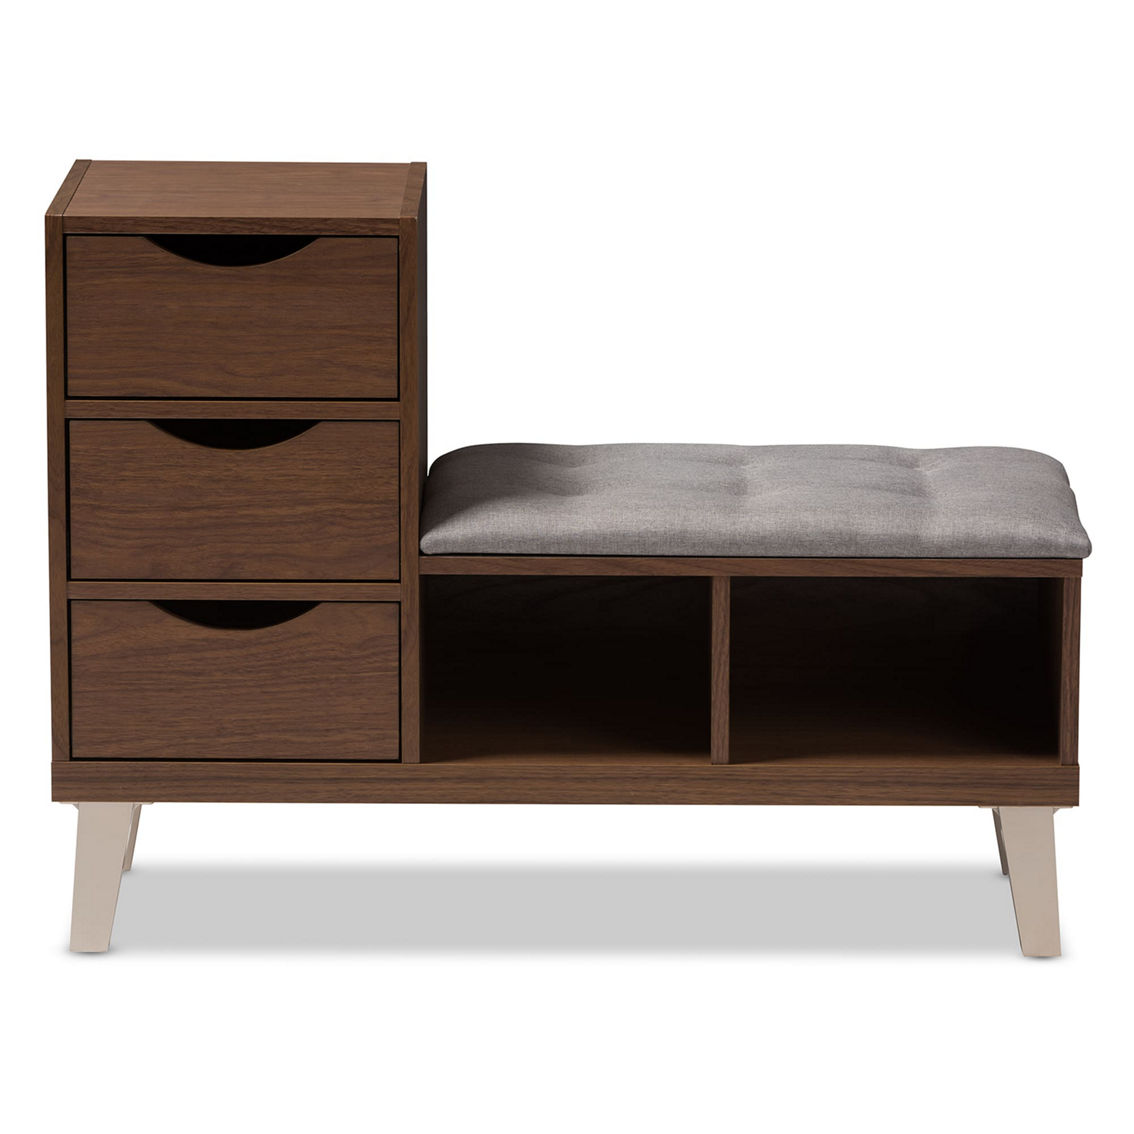 Baxton Studio Arielle Walnut Wood 3-Drawer Shoe Storage With Upholstered Bench - Image 3 of 5